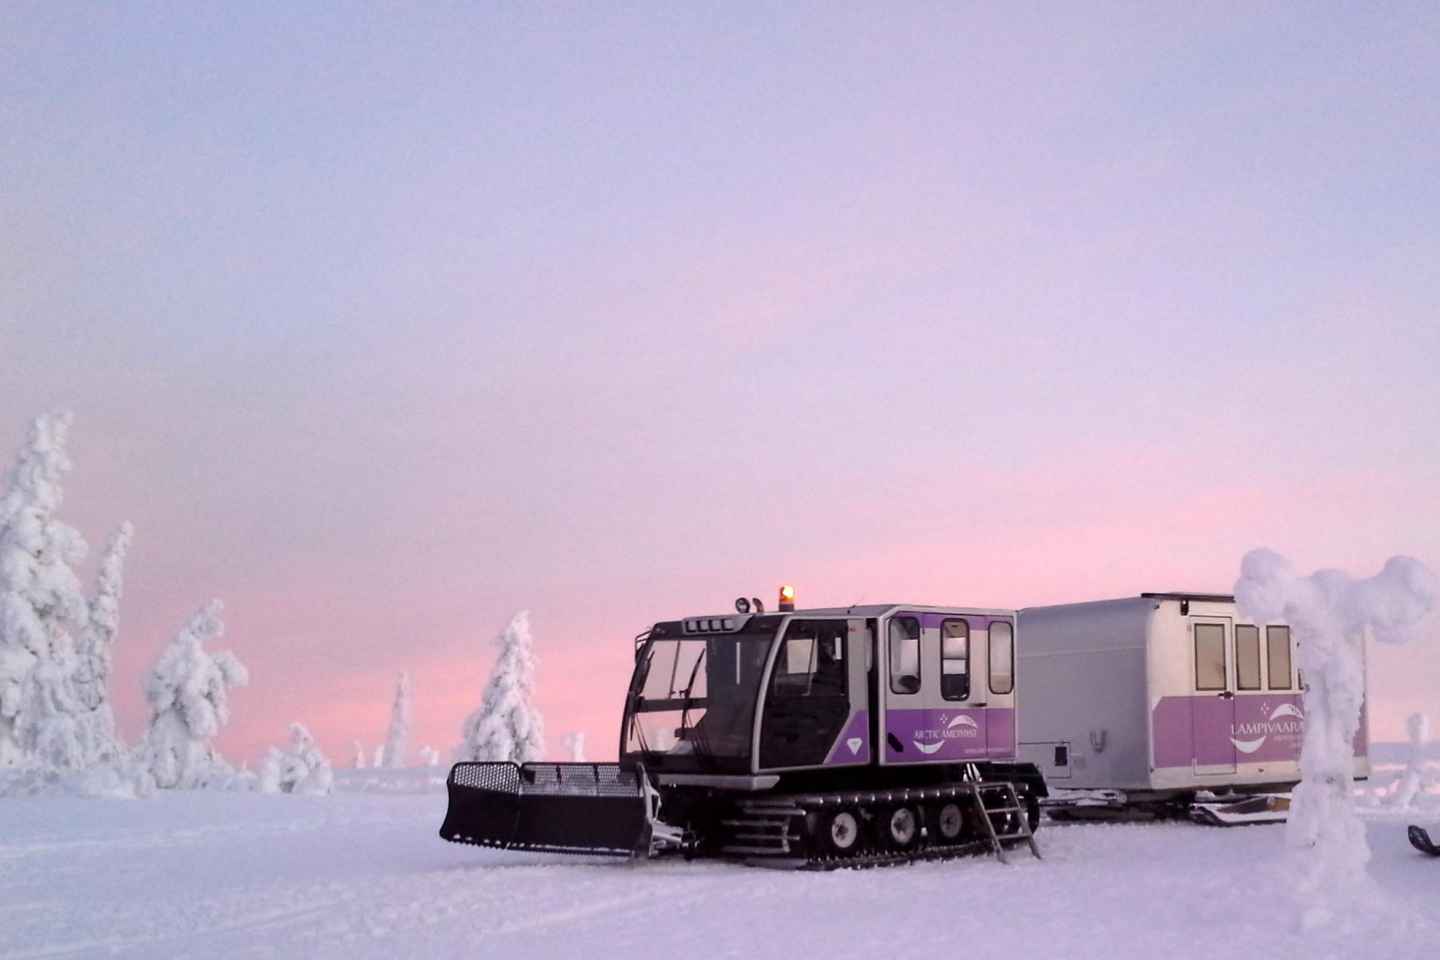 From Rovaniemi: Full Day Tour to the Luosto Amethyst Mines